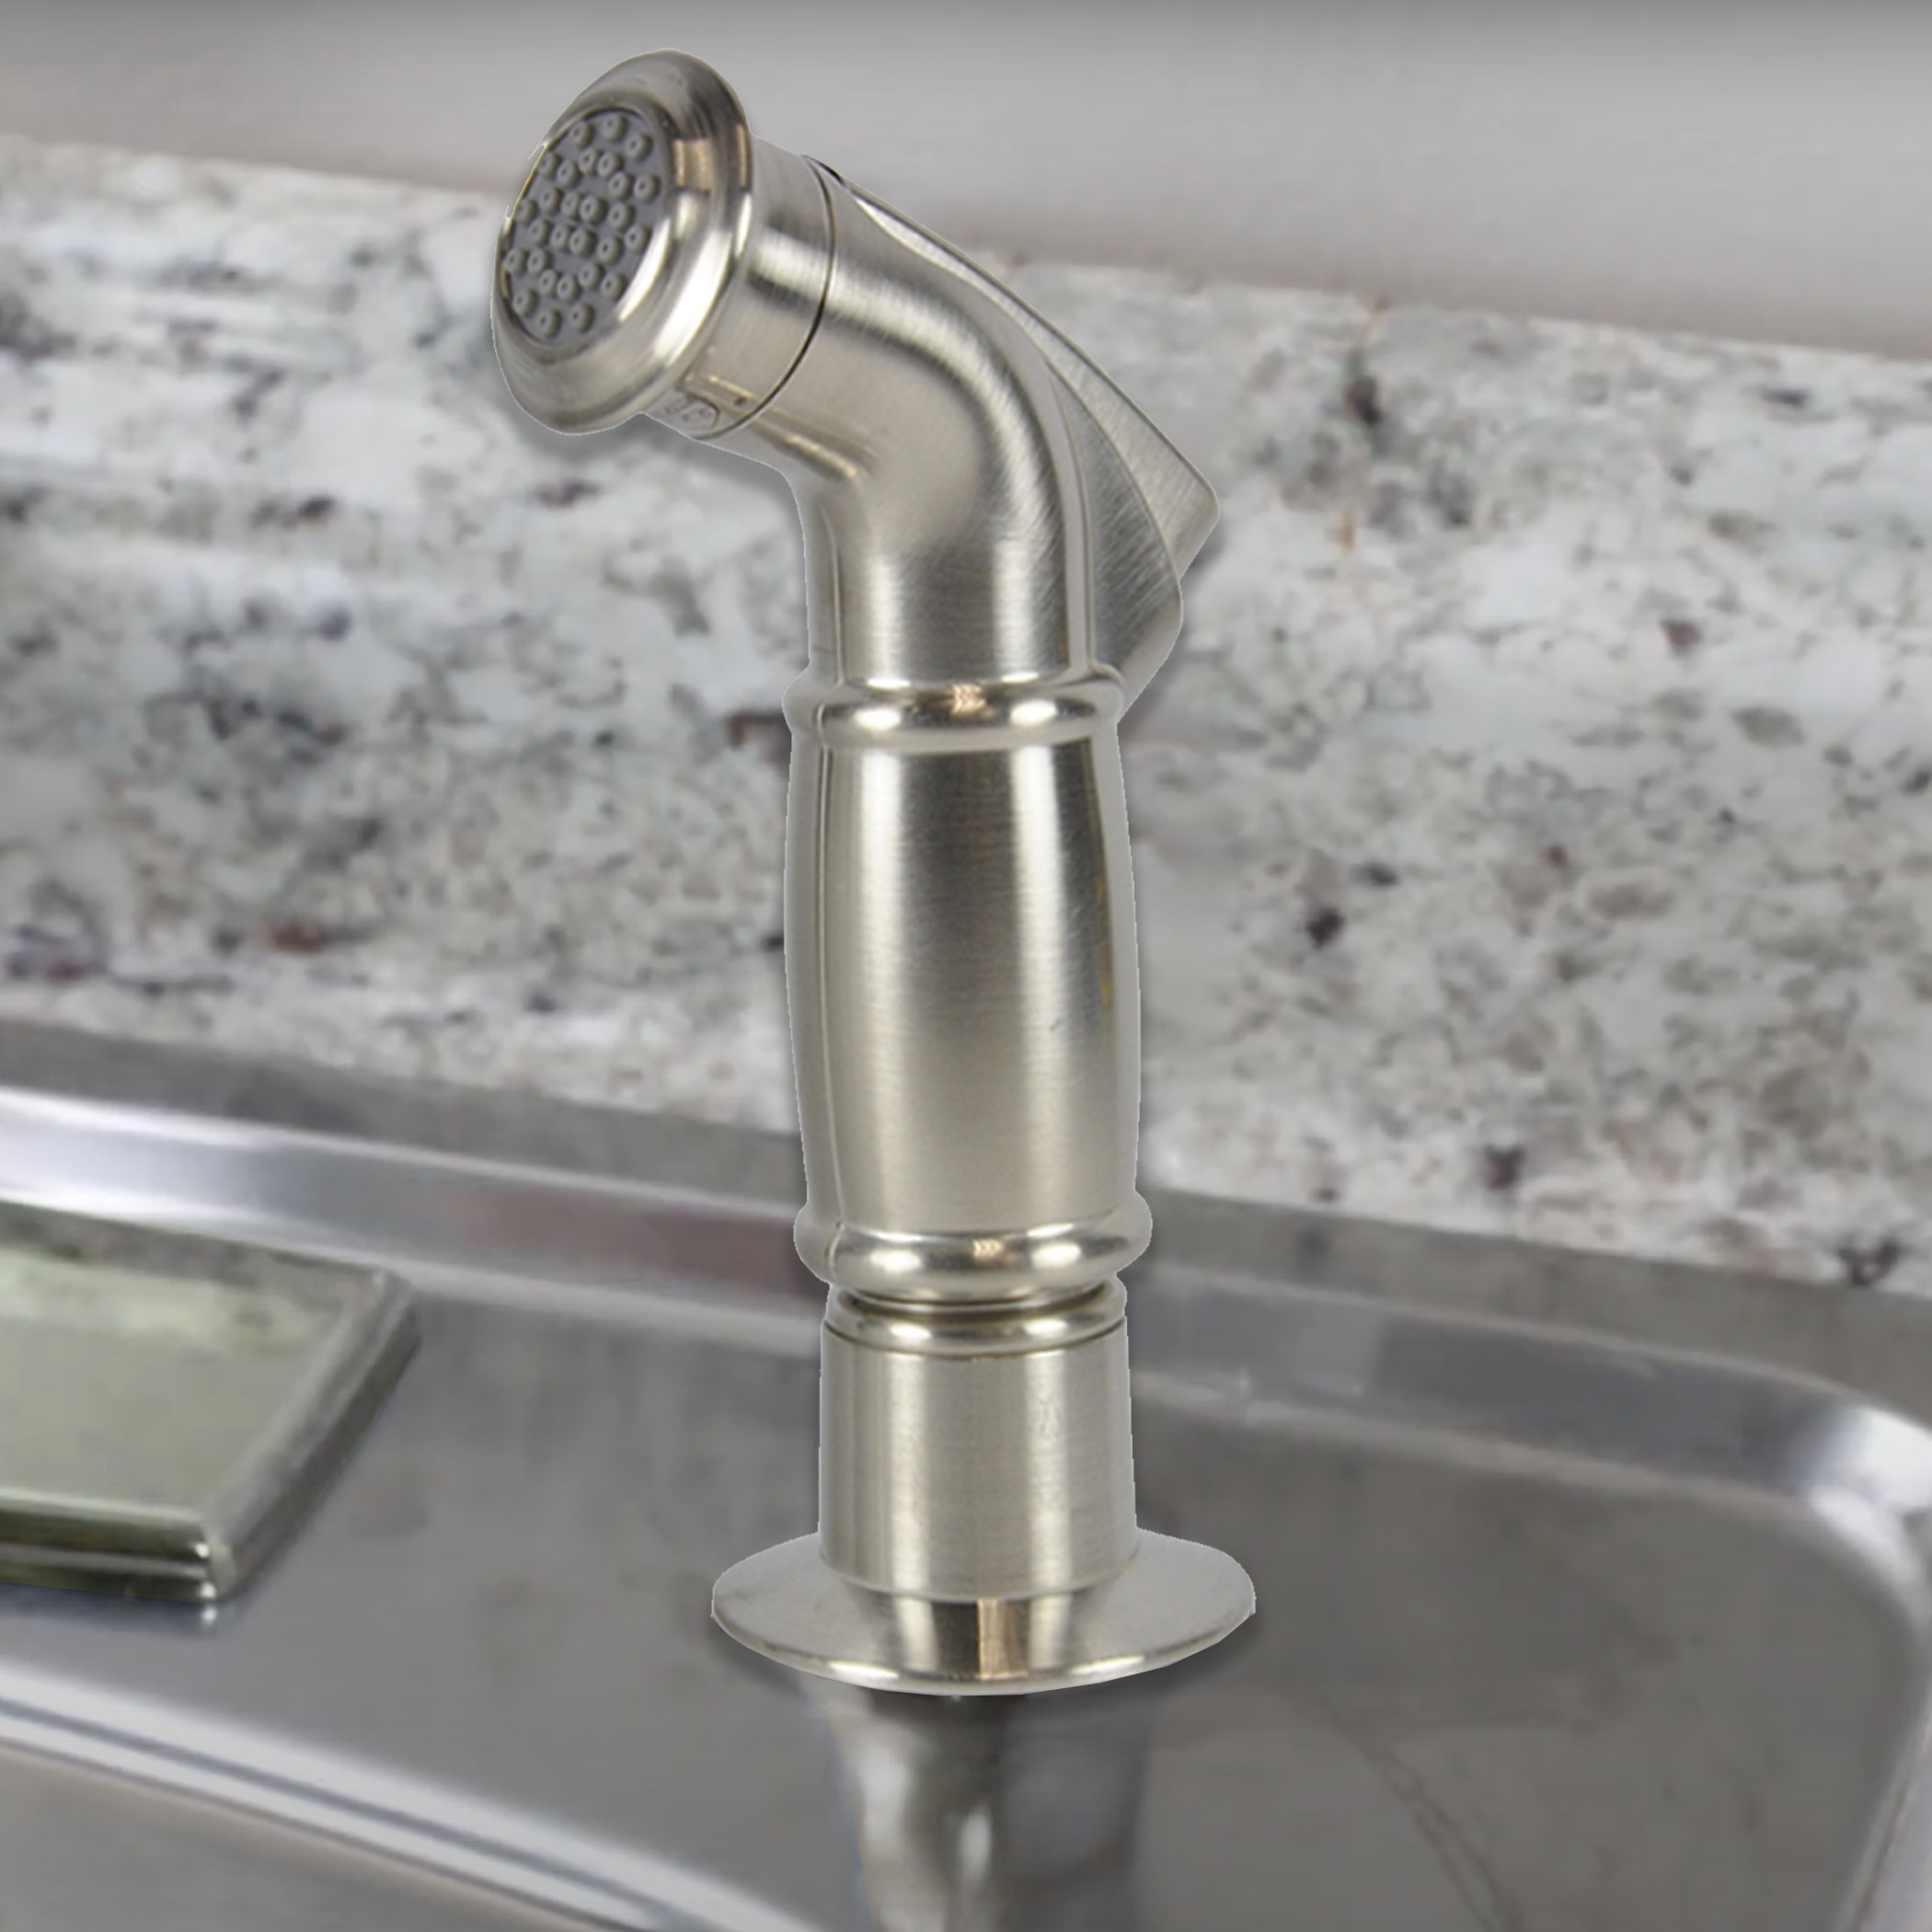 Universal Kitchen Spray Hose Guide in Brushed Nickel